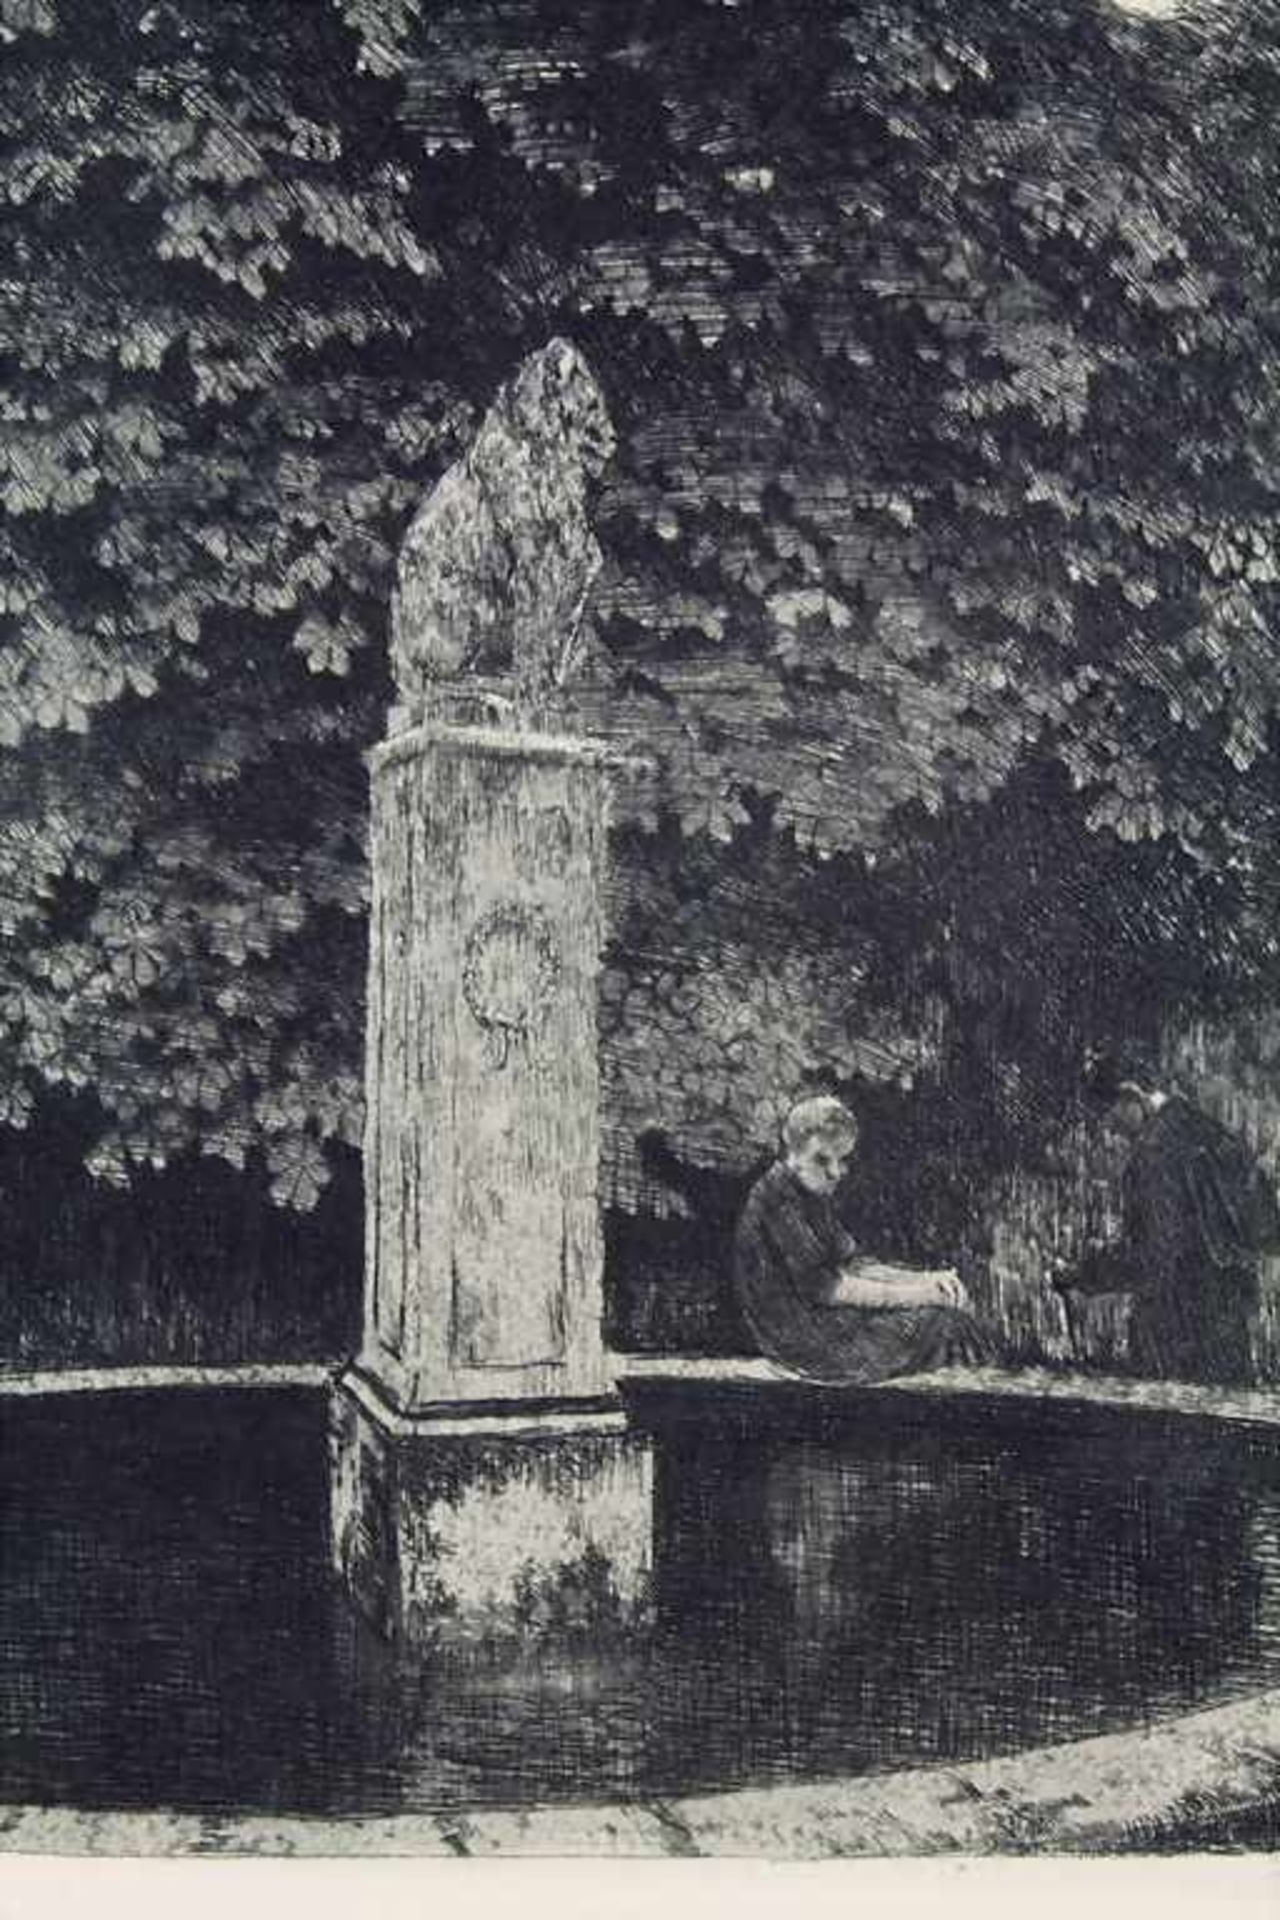 Franz Hecker (1870-1944), 'Mann am Brunnenrand' / 'A man seated on the edge of a fountain' - Image 4 of 5